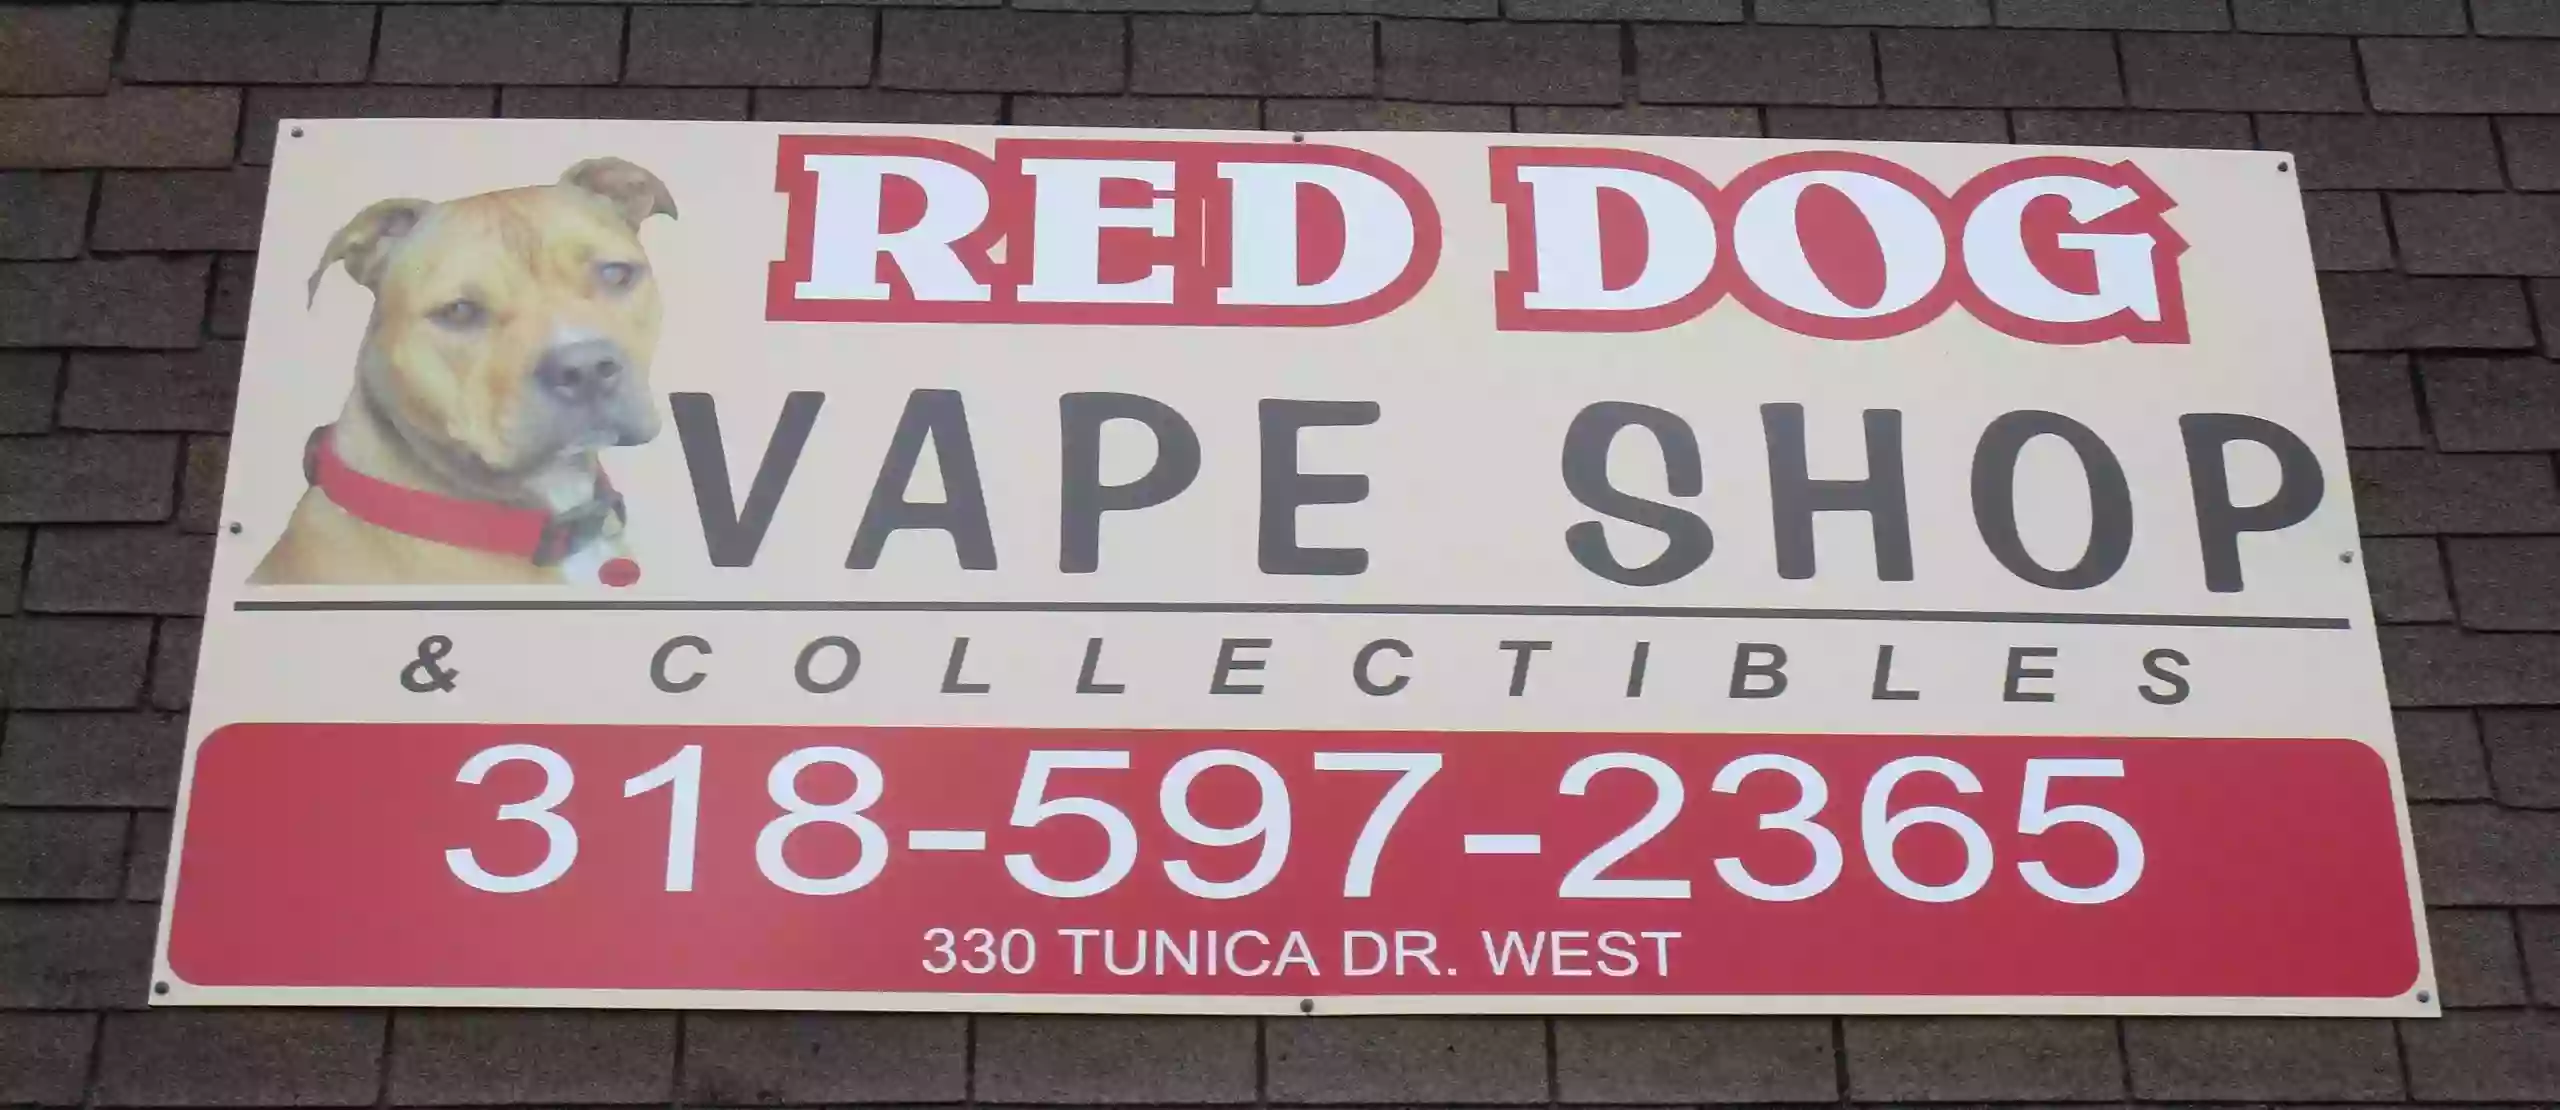 Red Dog Vape Shop and Collectibles